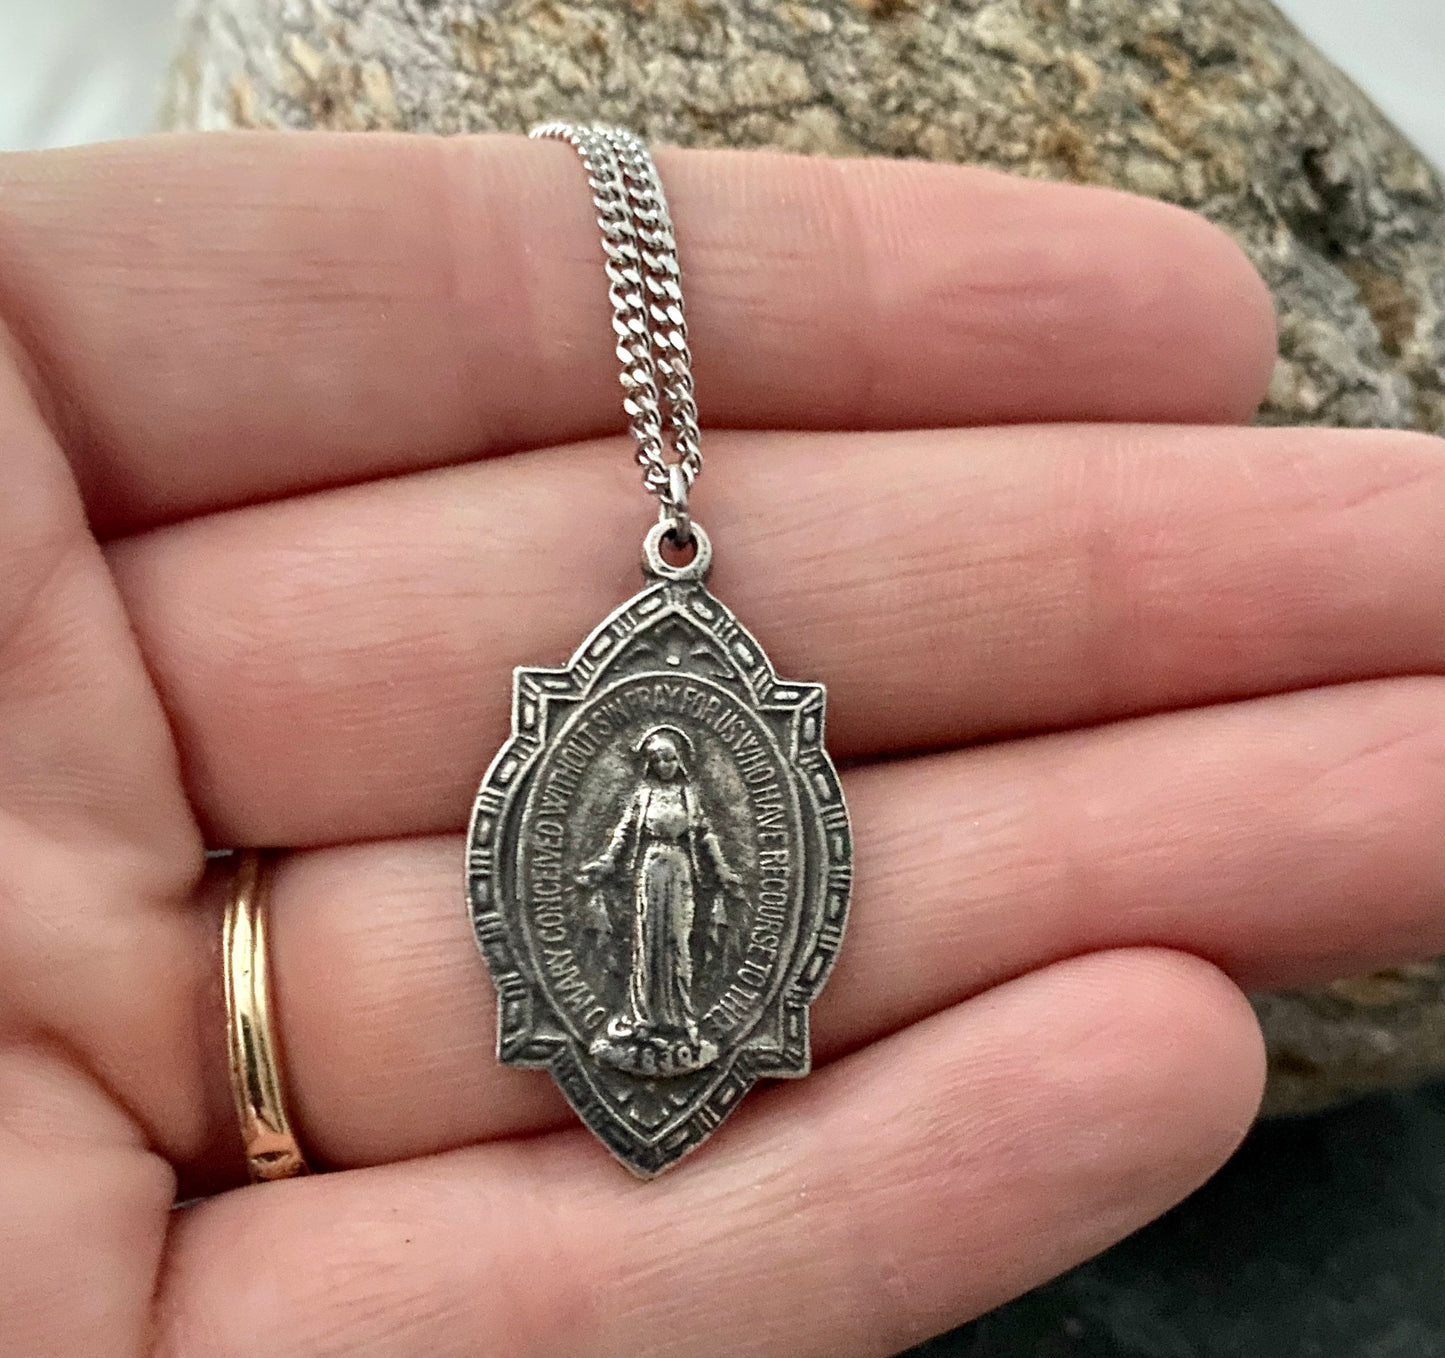 Men's Miraculous Medal featuring a depiction of the Blessed Mother, Steel chain necklace, 20 or 24 inches, ST-009